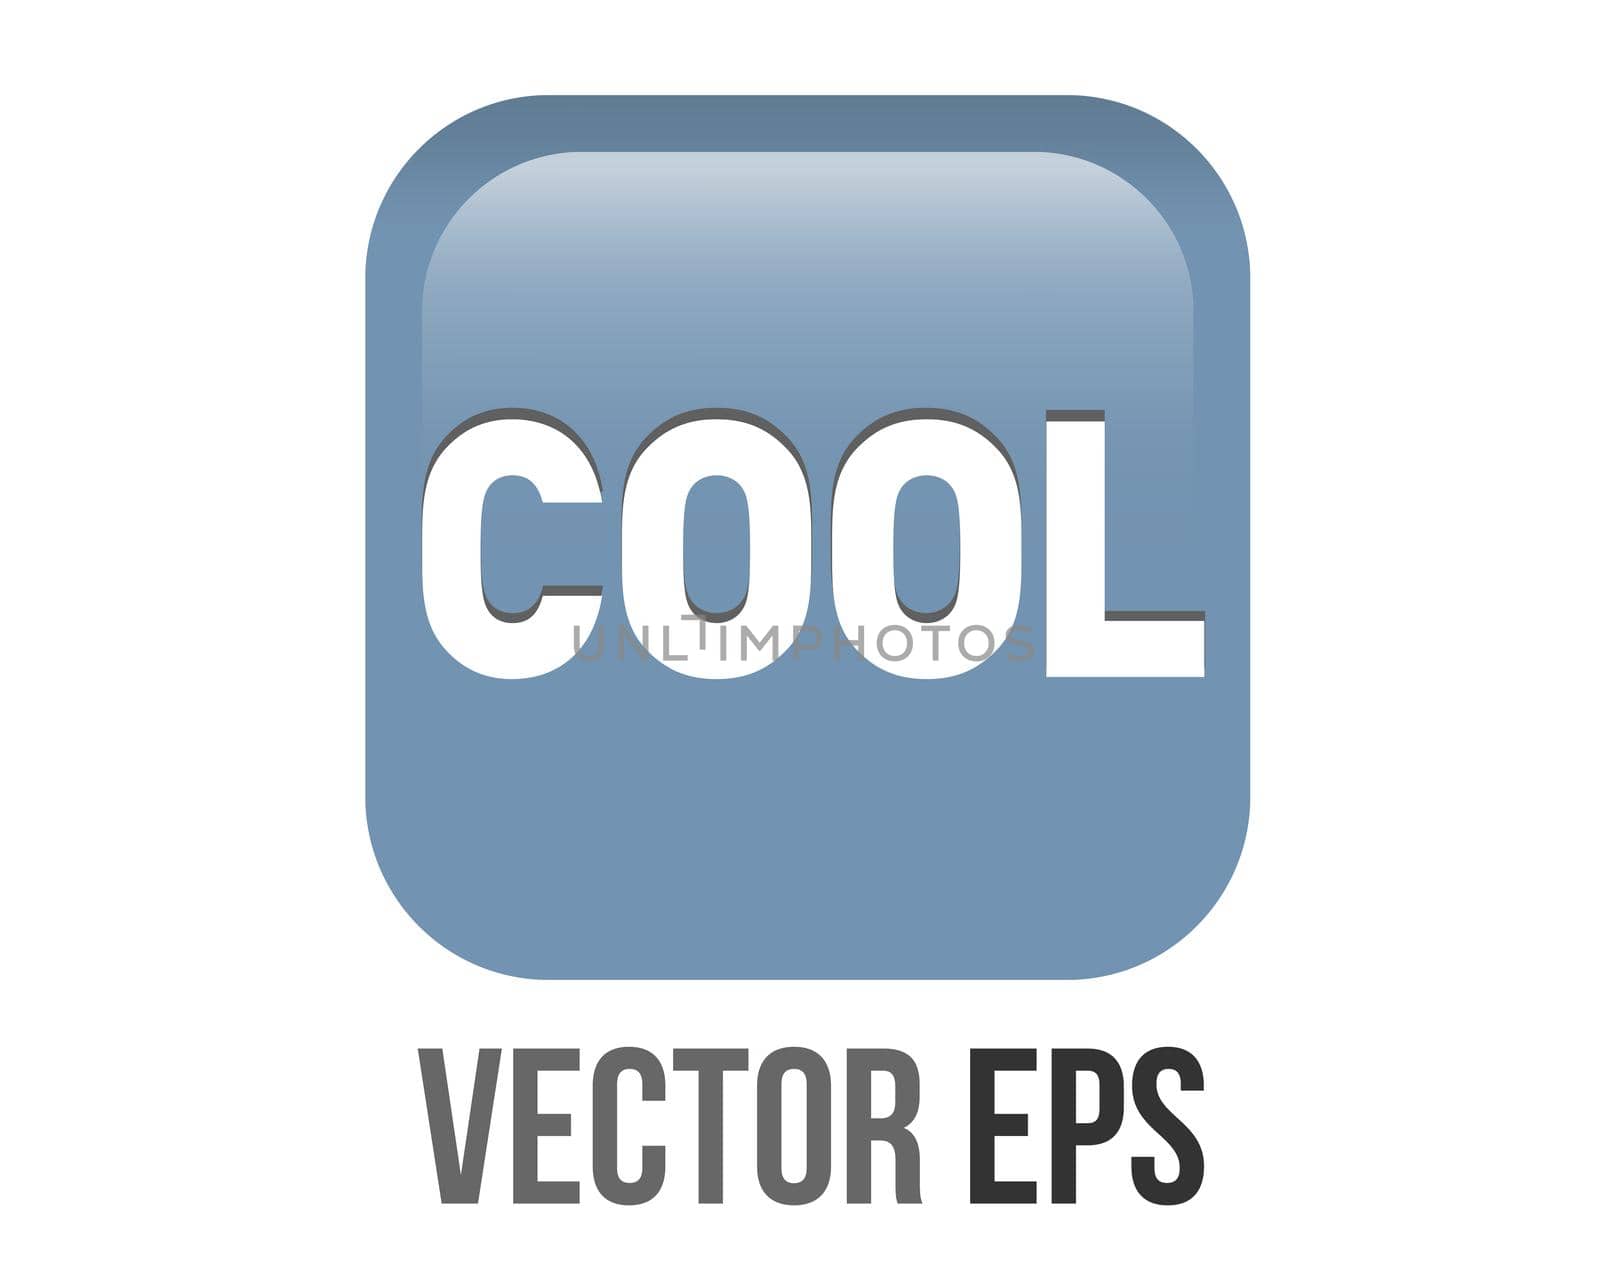 The isolated vector square gradient blue gray word cool button icon with white COOL word